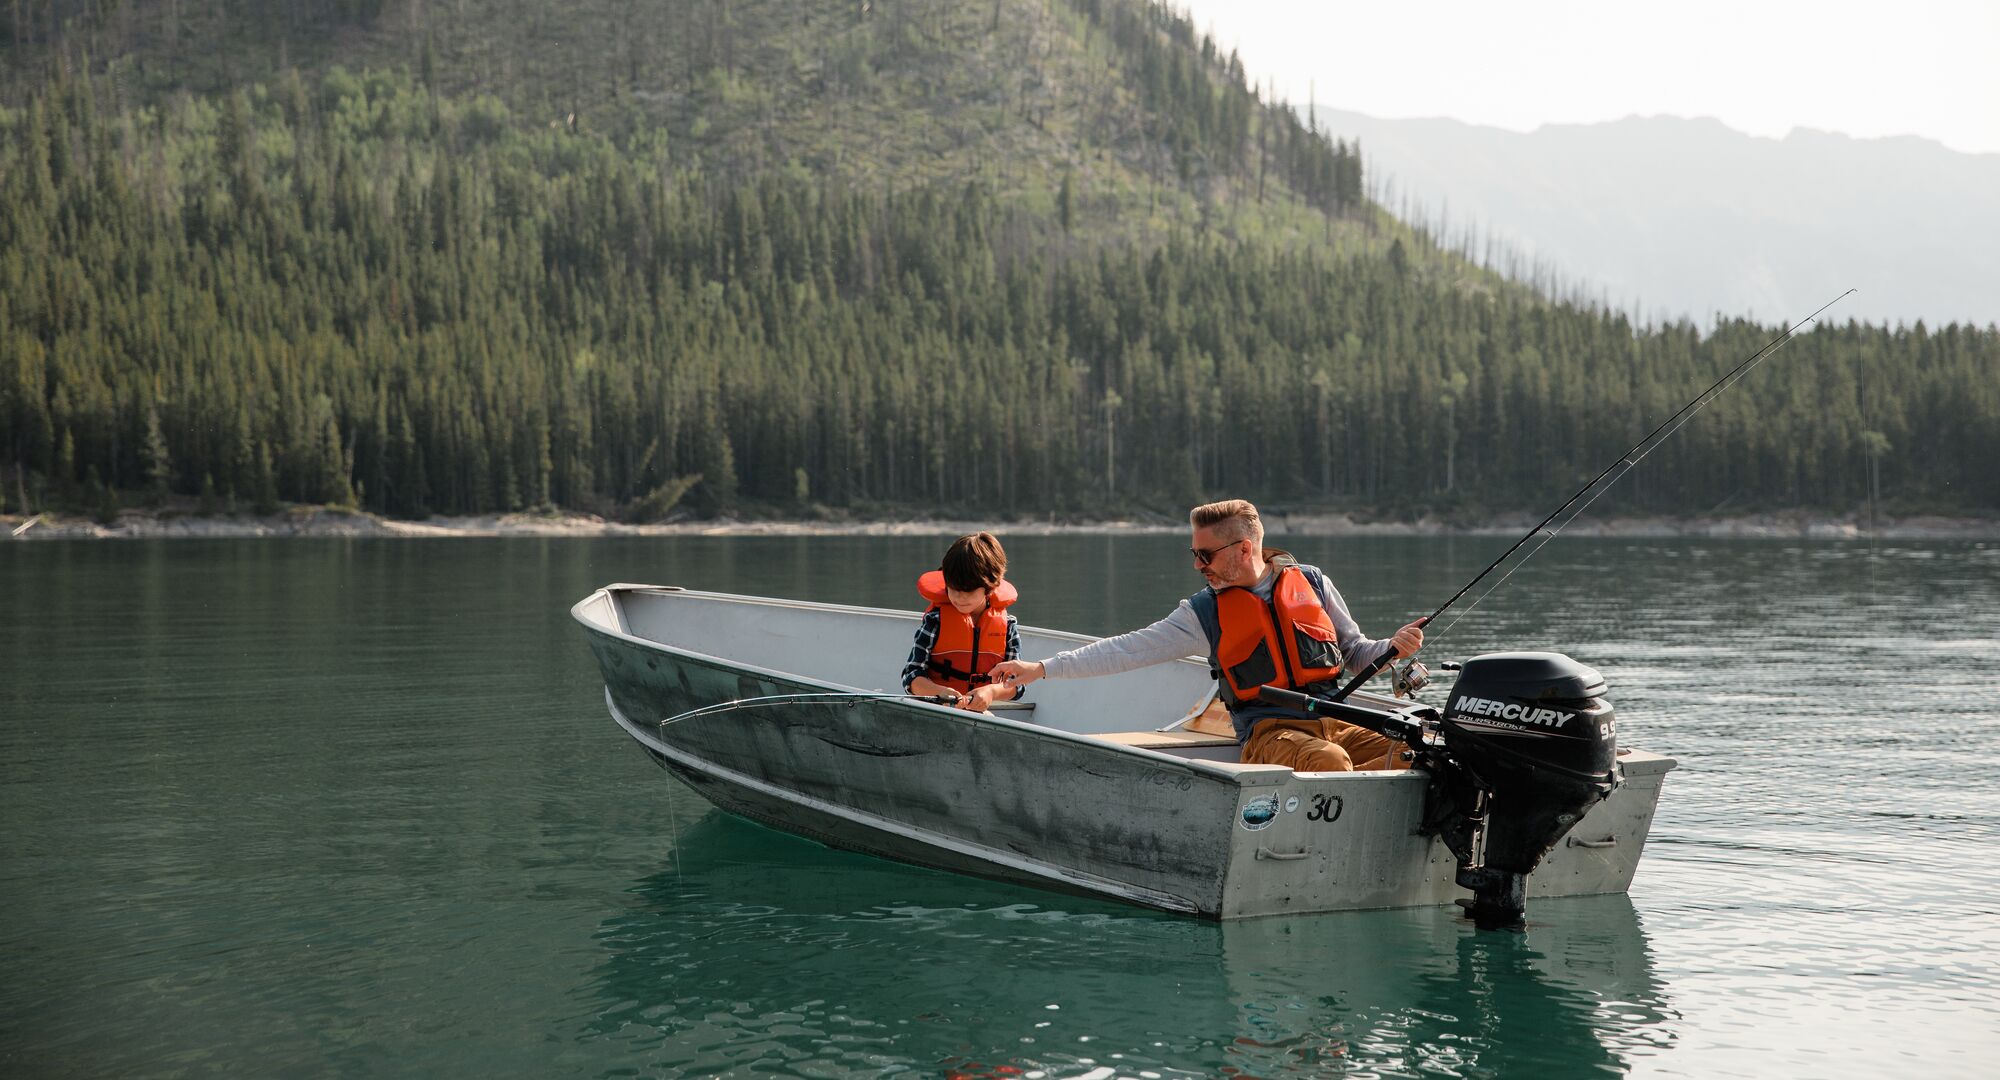 A father and son fishing from a small motor boat in Lake Minnewanka